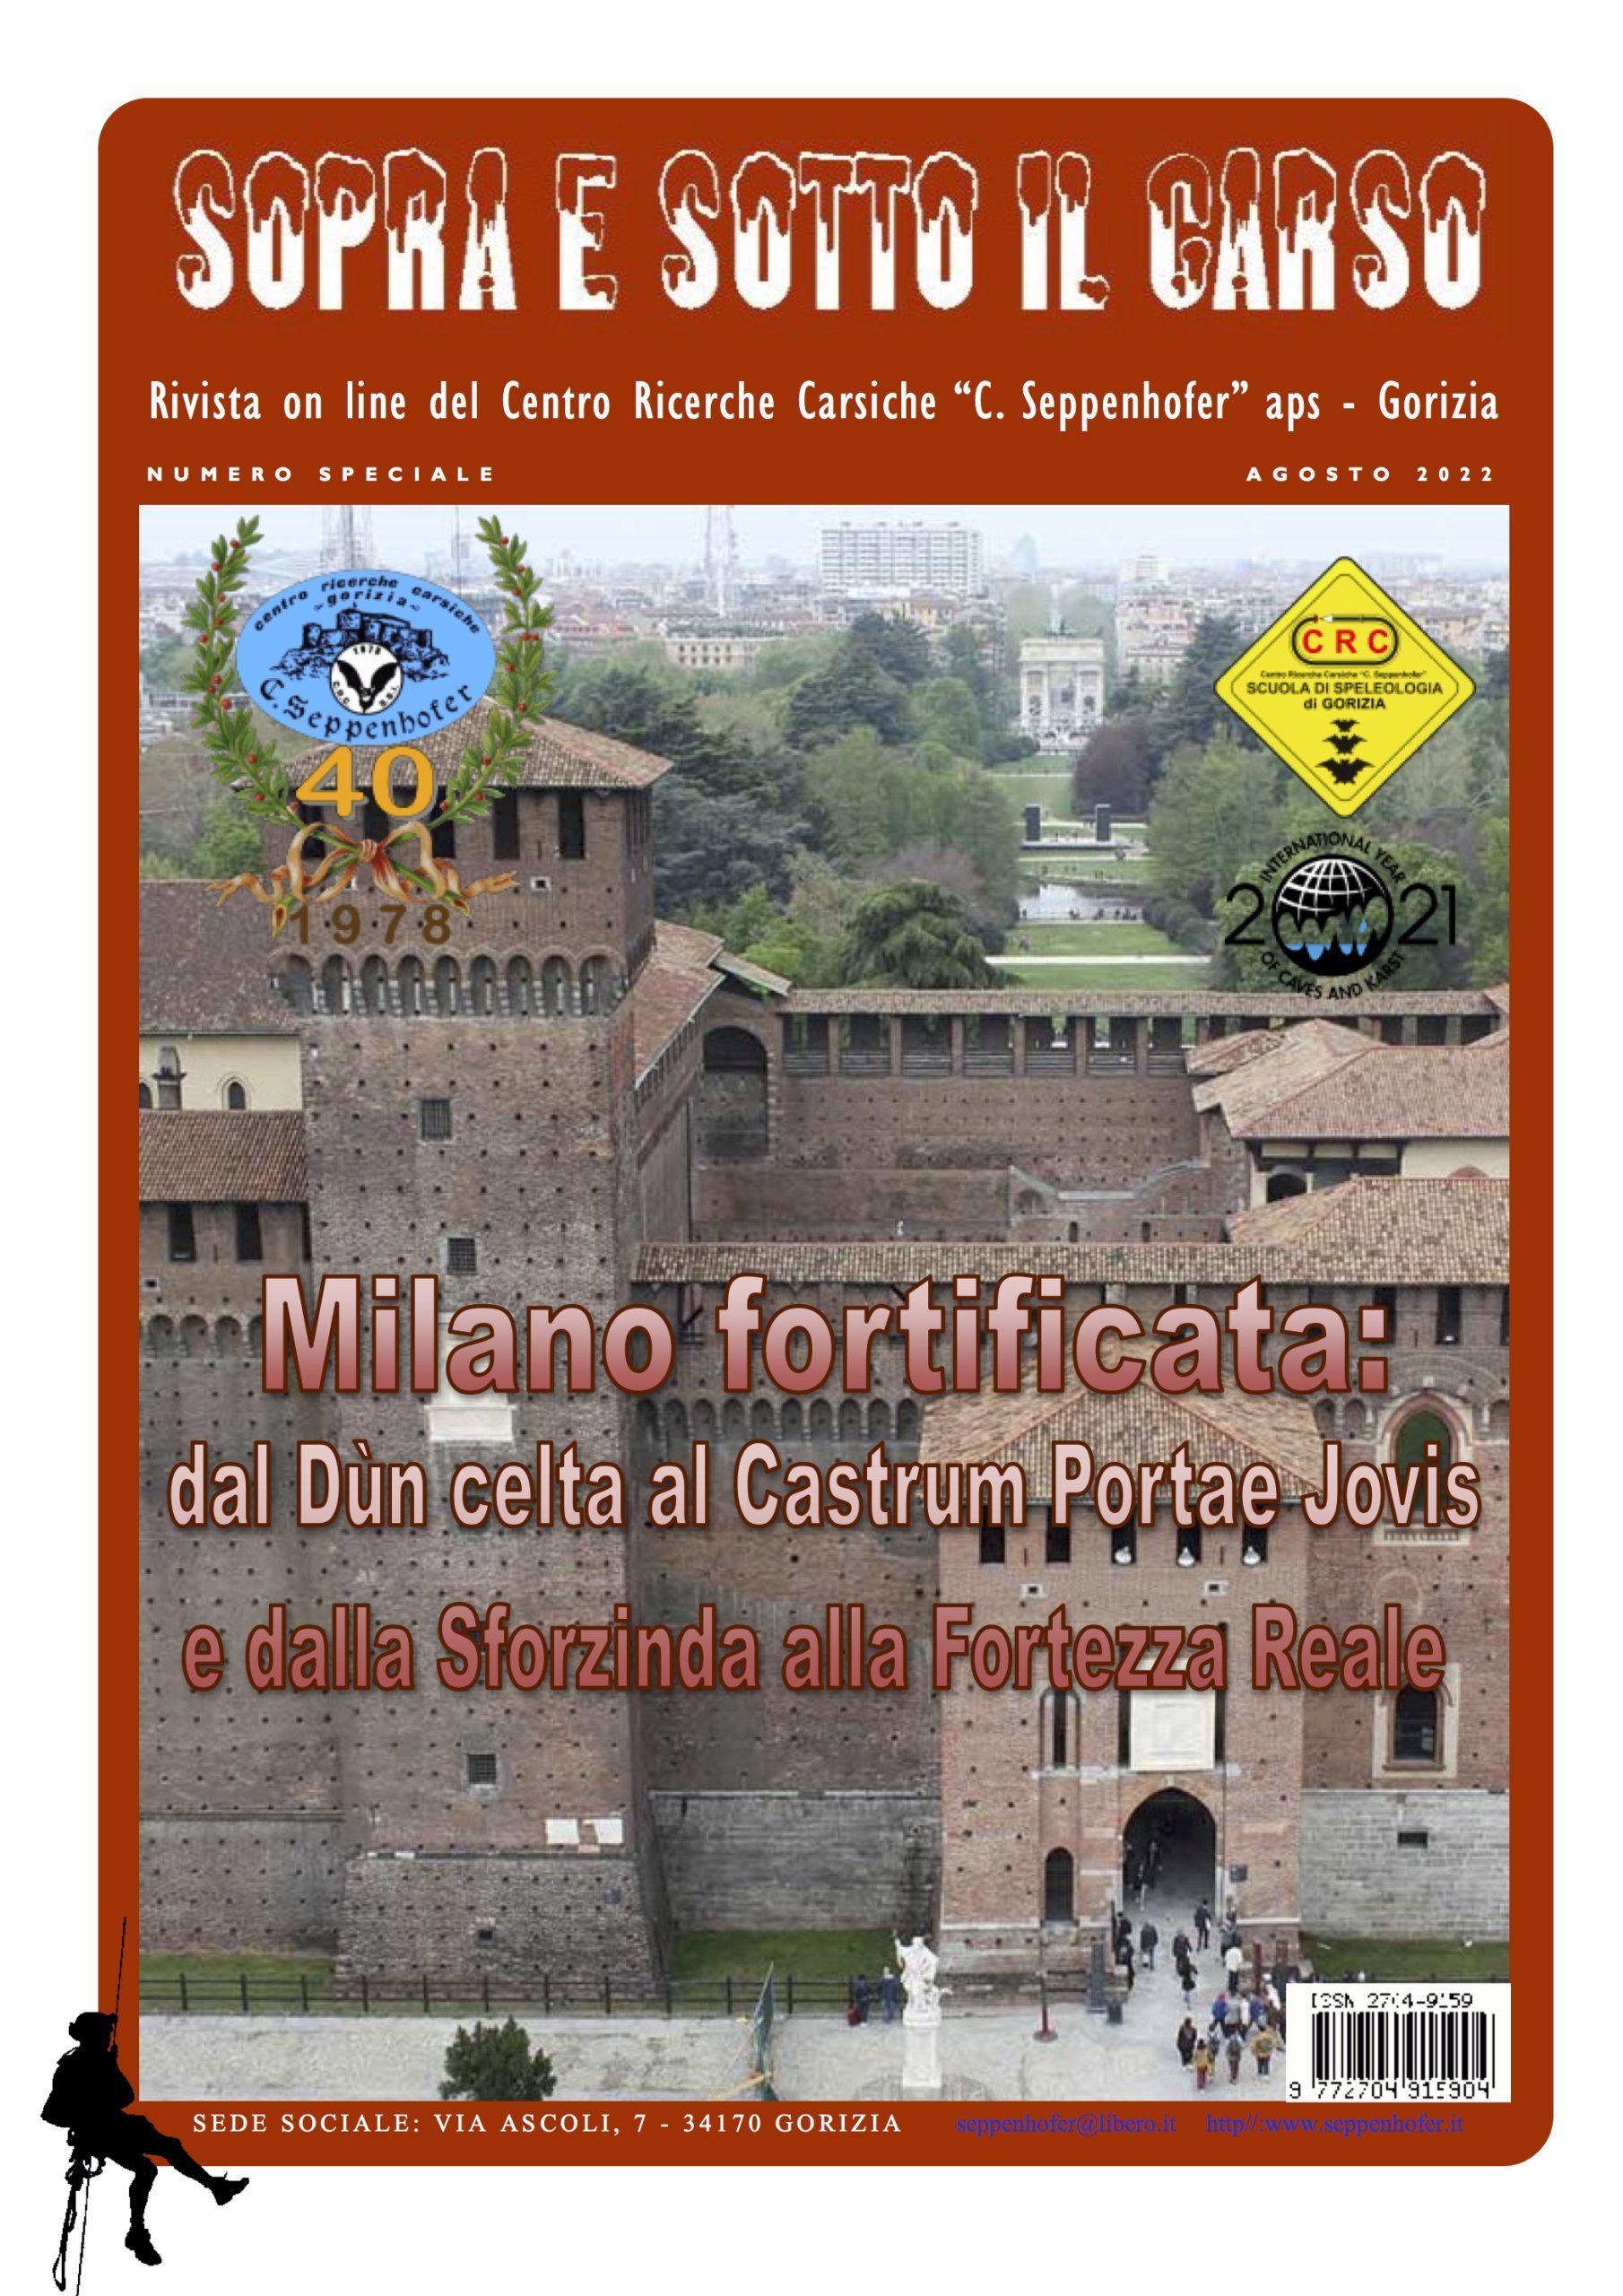 https://www.archeologiadelsottosuolo.com/wp-content/uploads/2022/08/Speciale-Milano-fortificata.